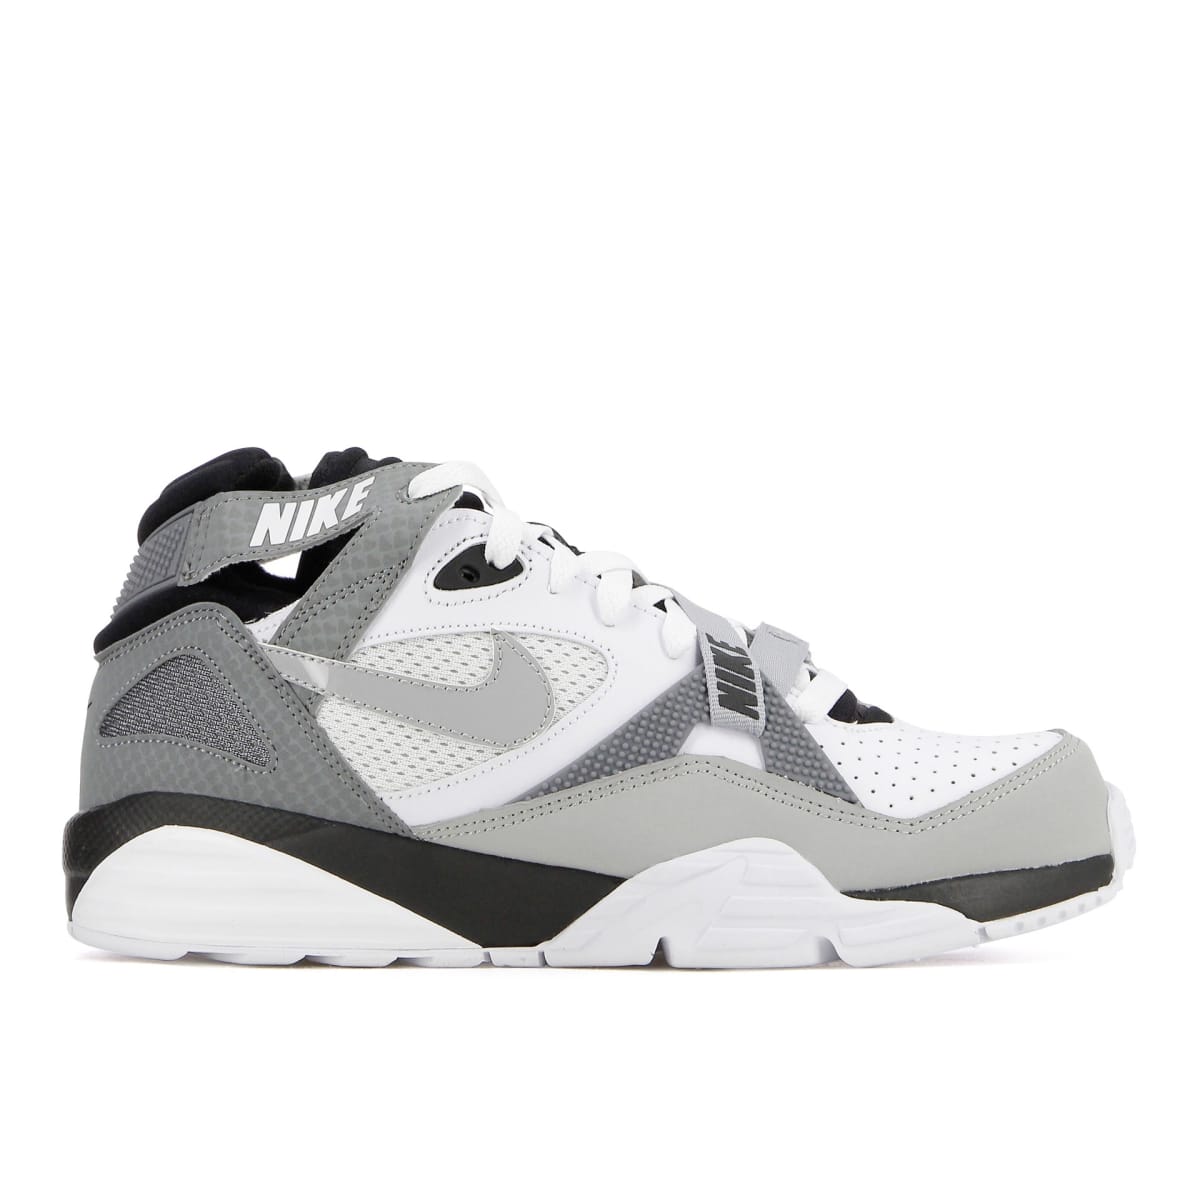 Nike Air Trainer Max 91 | Nike | Sneaker News, Launches, Release ...